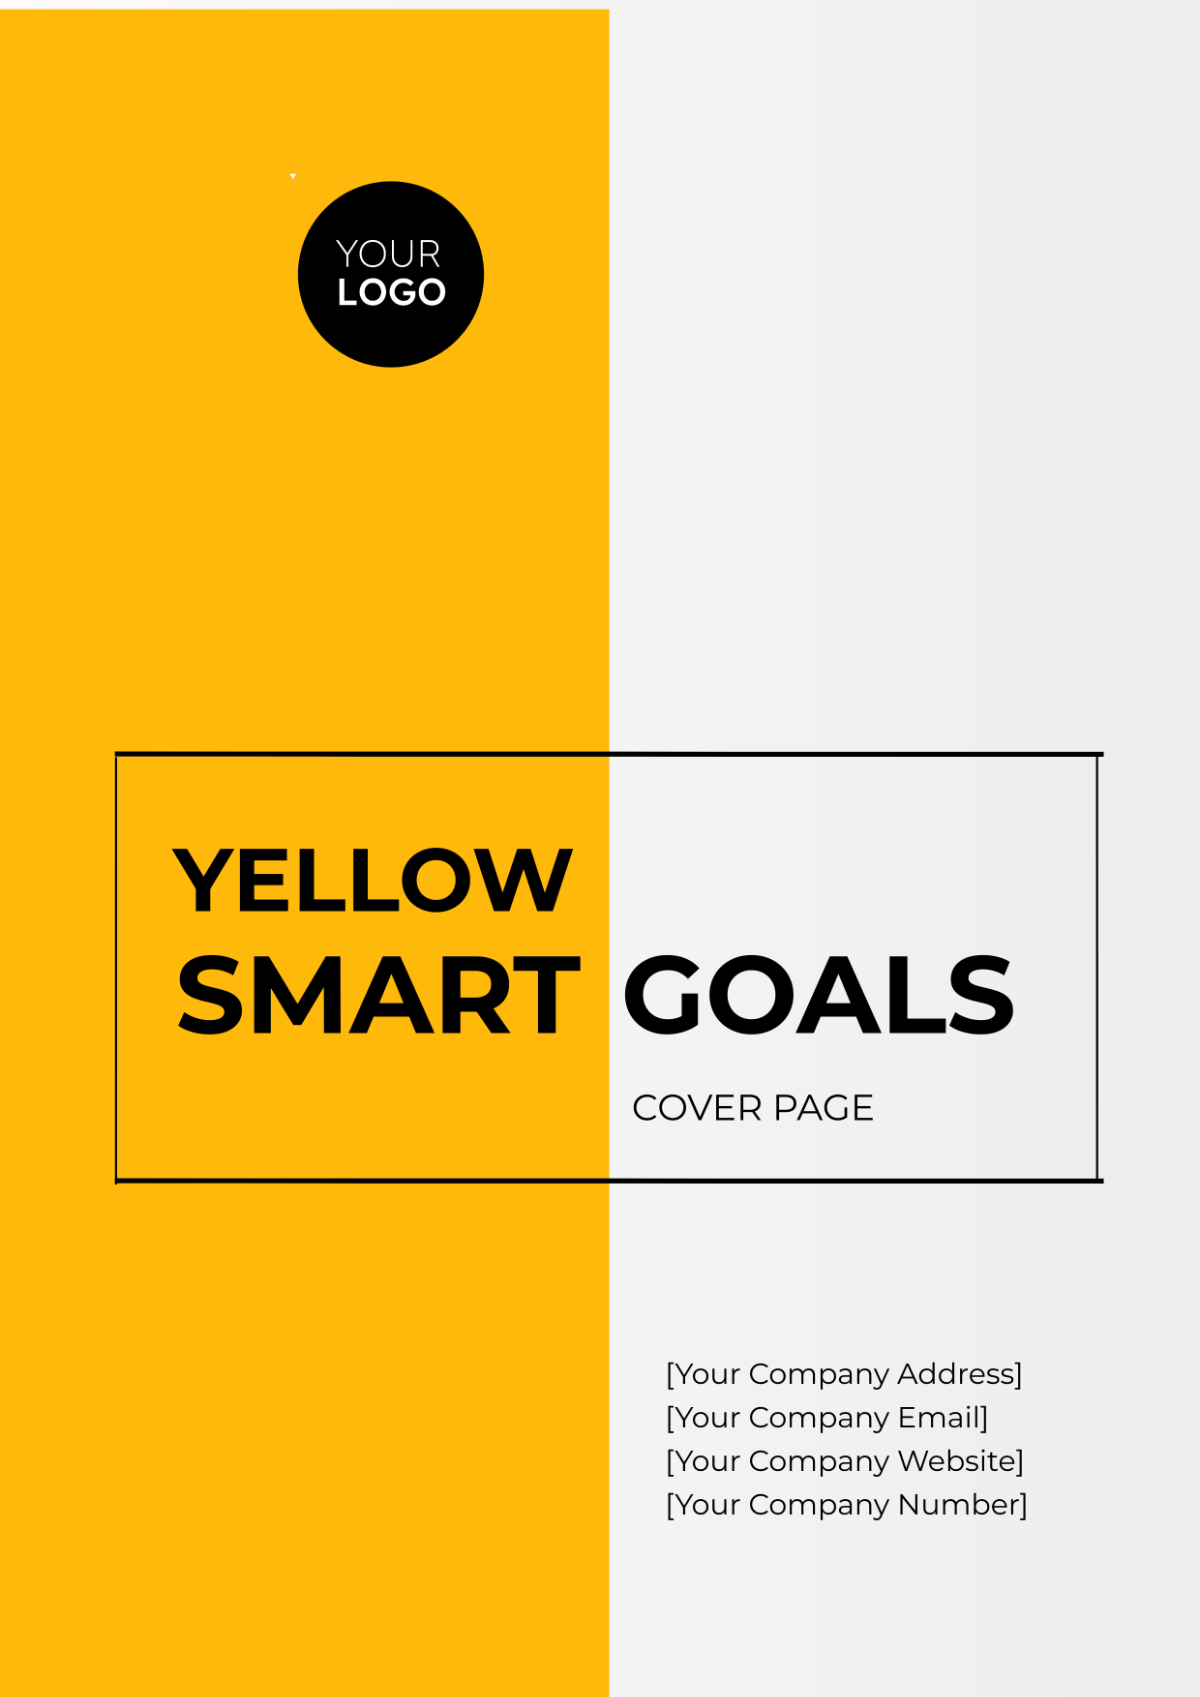 Yellow SMART Goals Cover Page